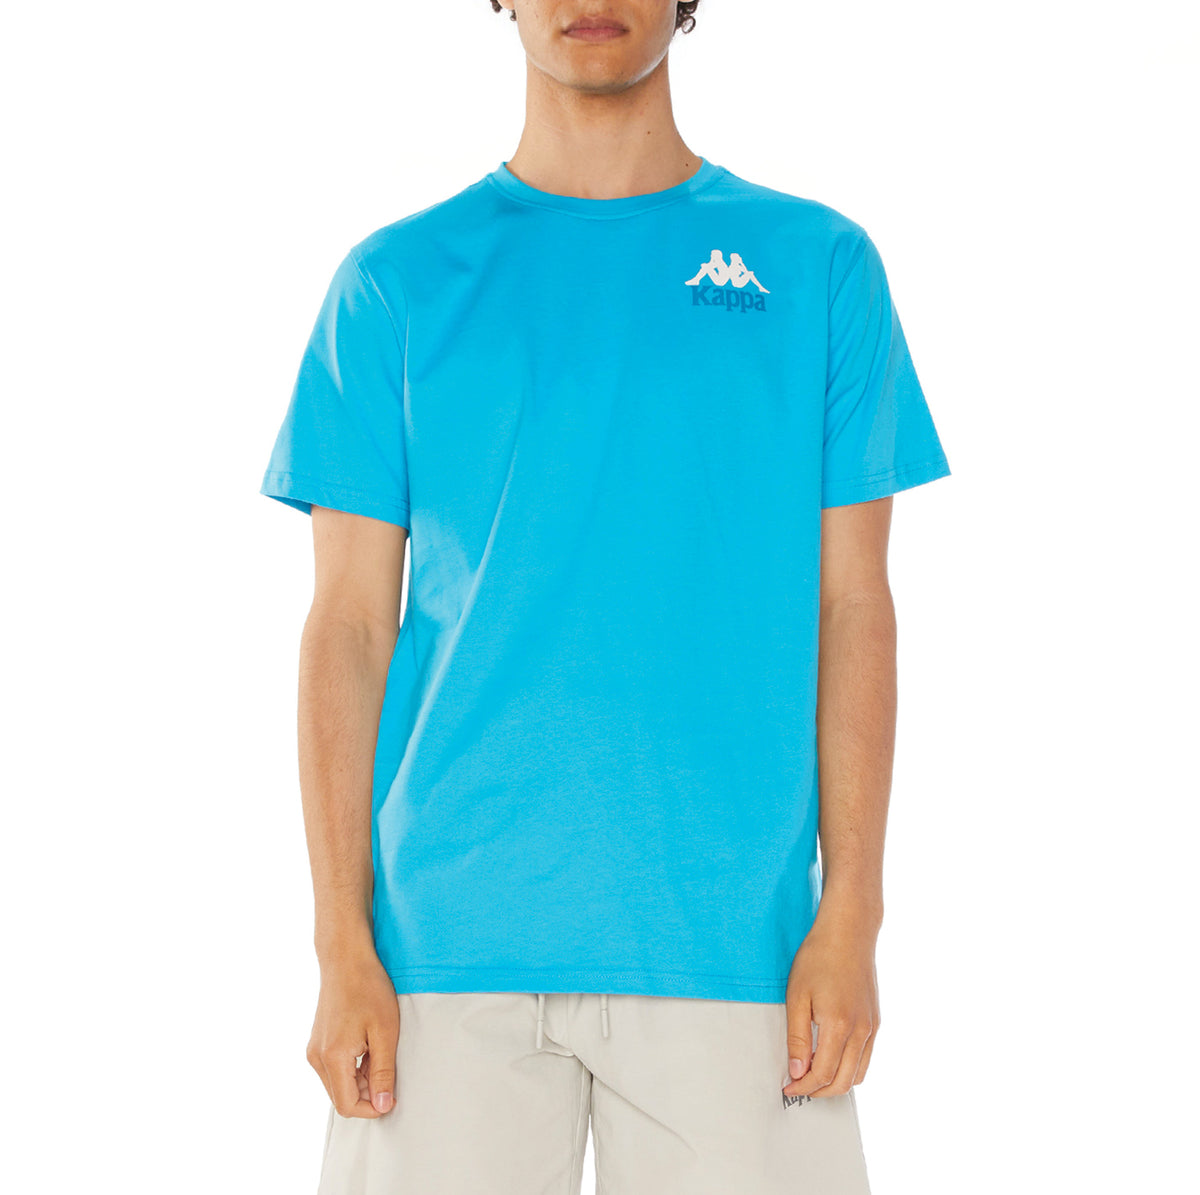 Shop Authentic Ables T-Shirt - Turquoise You guaranteed to US happy be Kappa . are